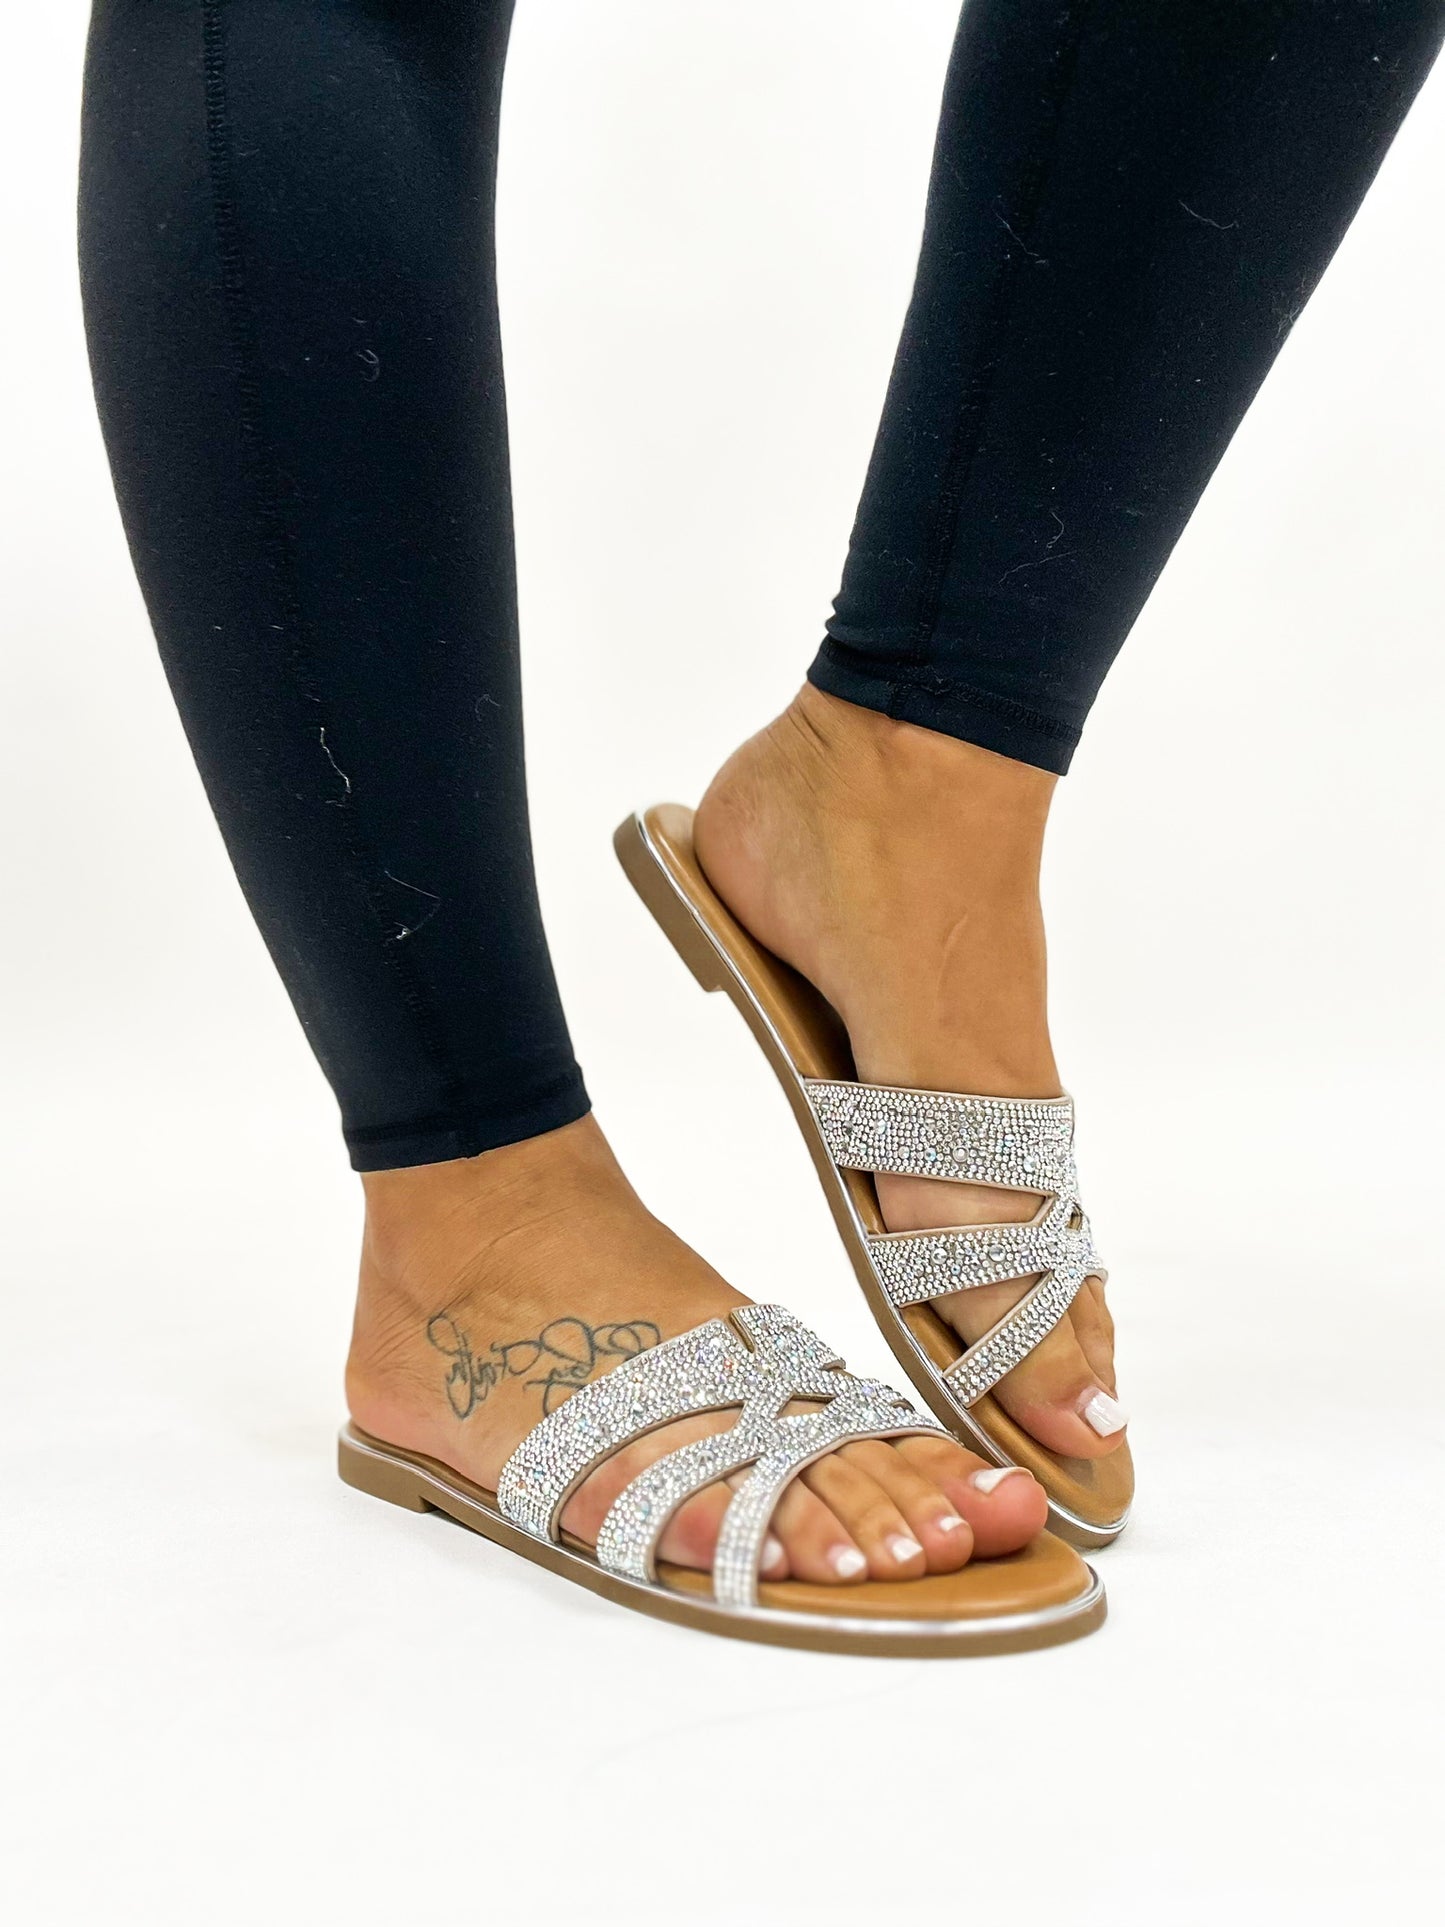 Corky's Clear Flair Sandals